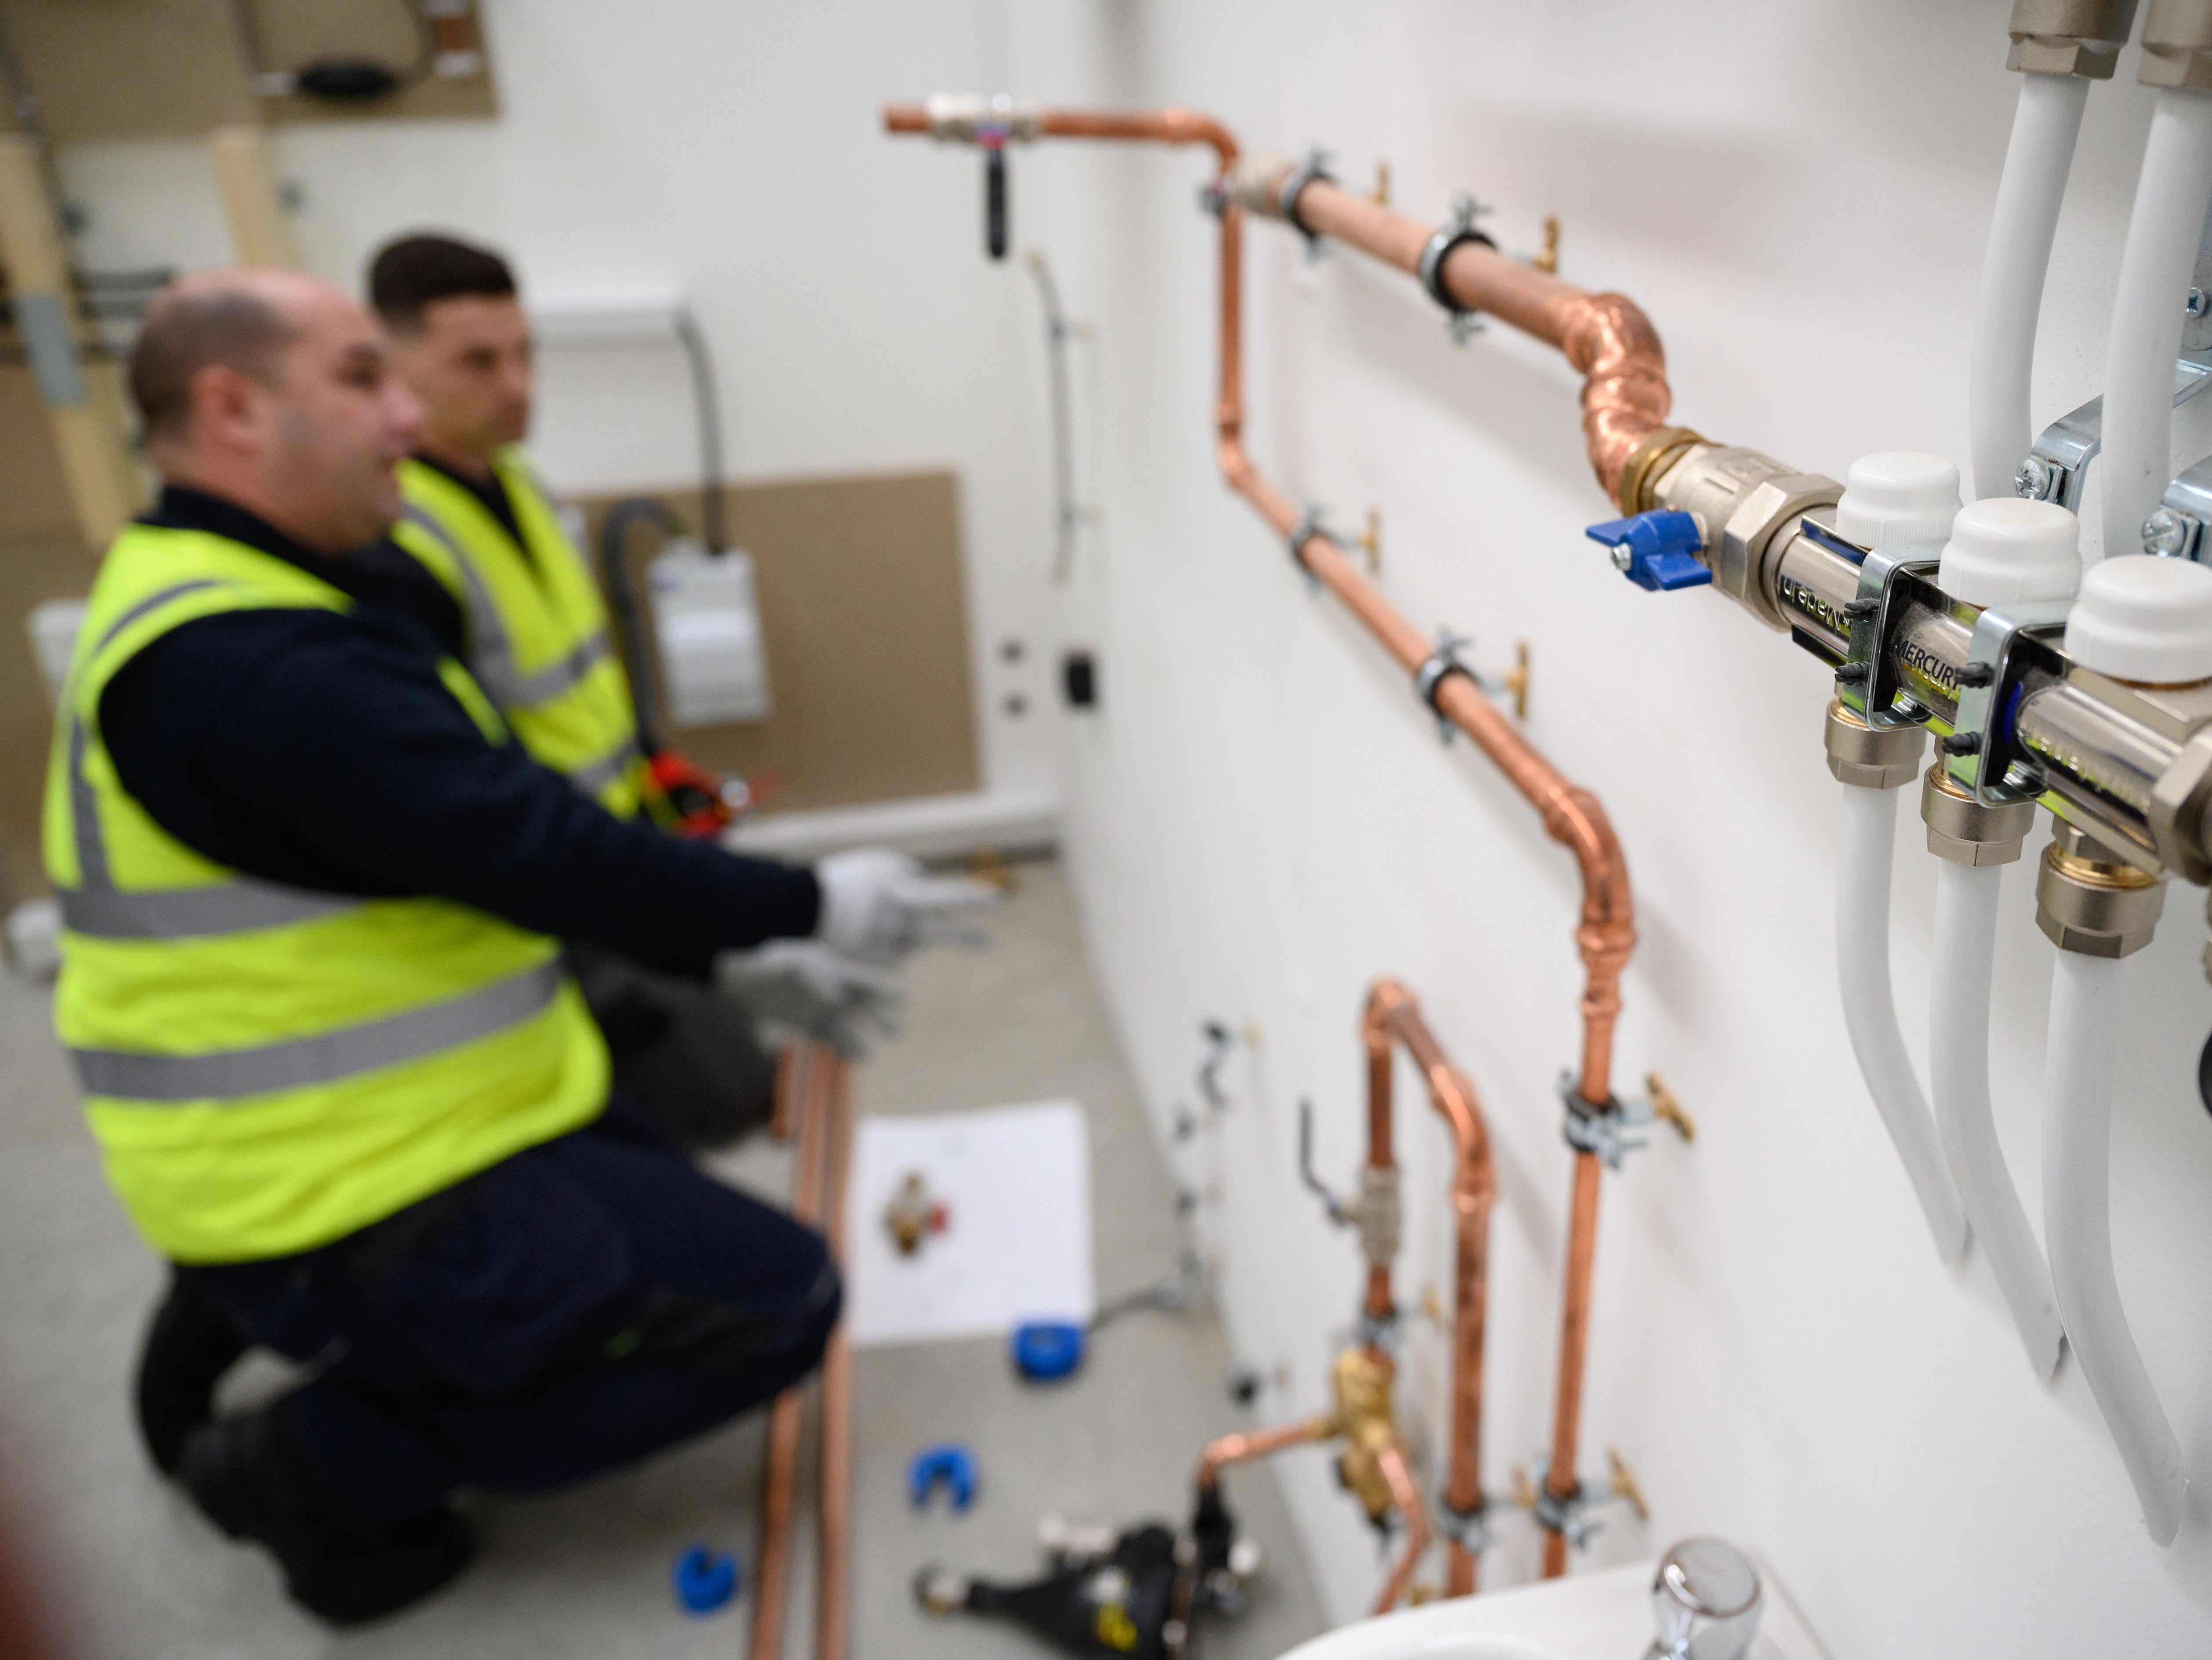 A think-tank has suggested a recruitment drive for ‘climate hero’ plumbers in a bid to bolster workforce for net-zero drive